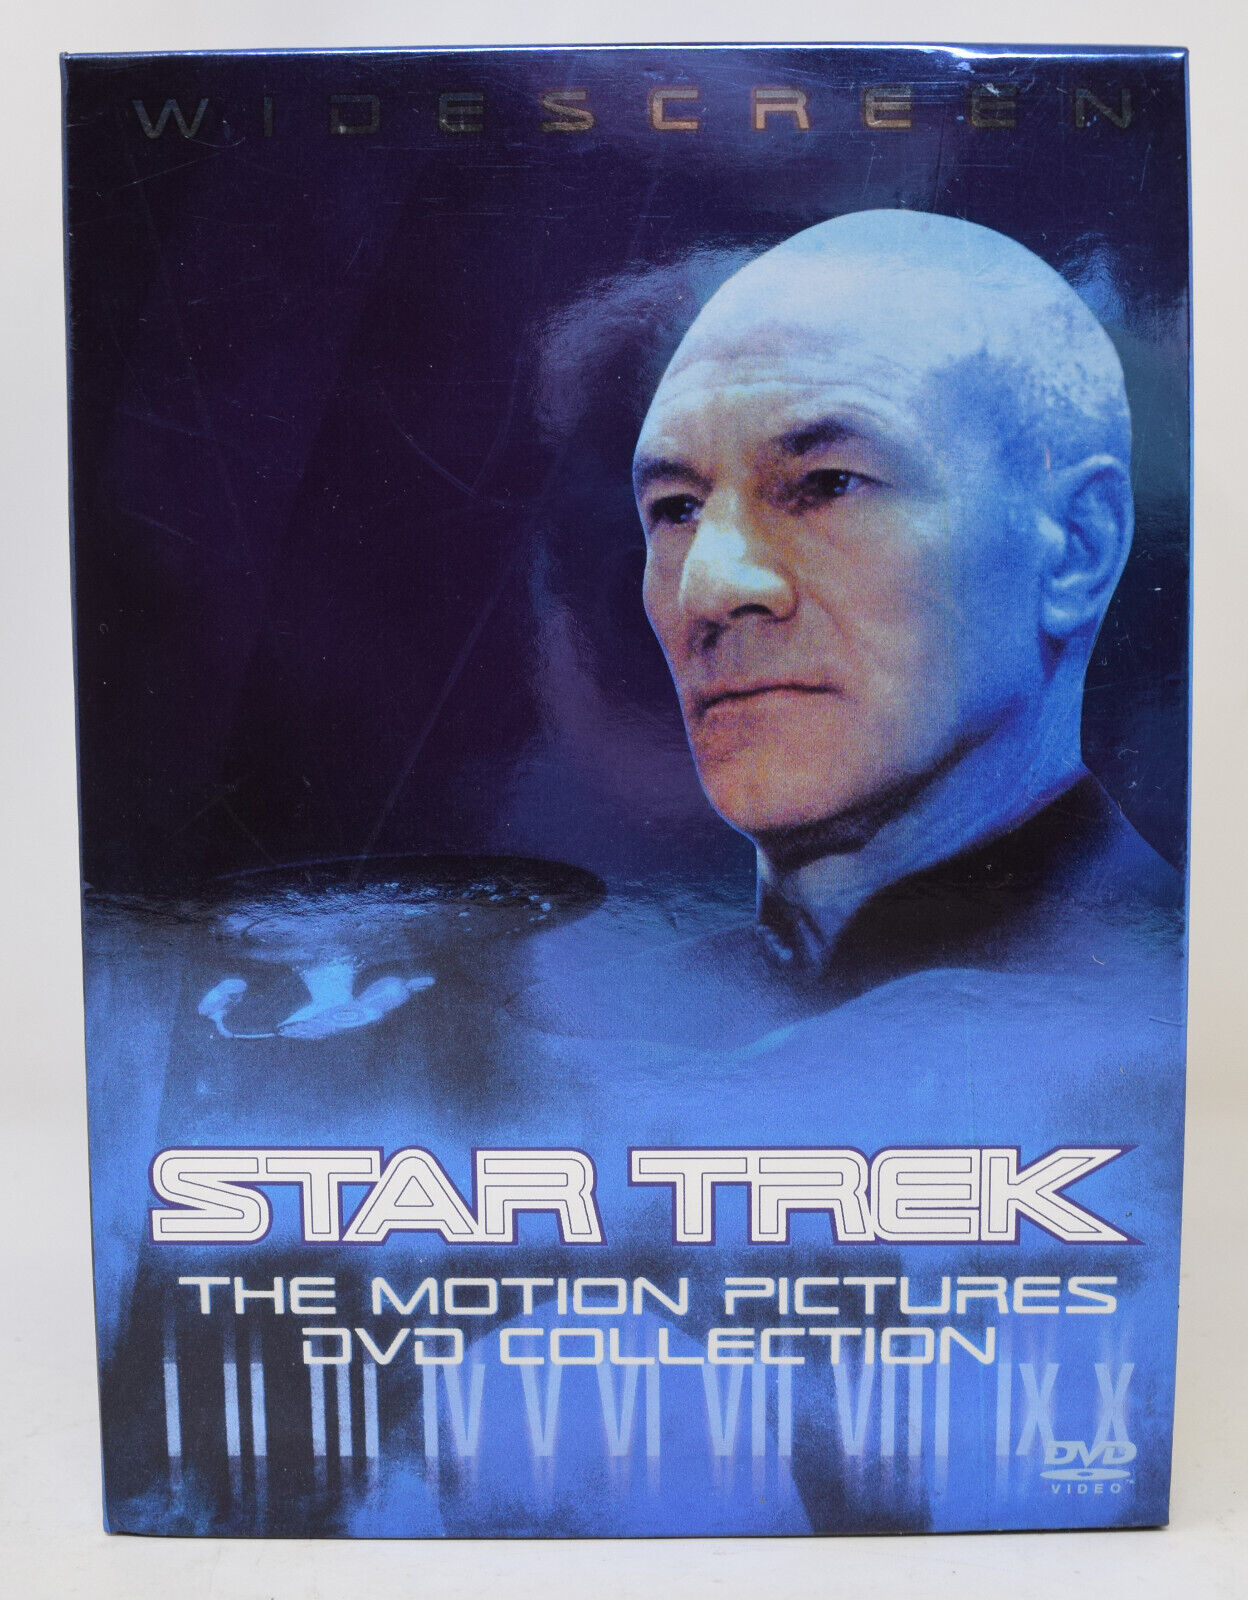 Primary image for Star Trek The Motion Pictures DVD Collection Box Set 10 Movies 20 Discs 2005